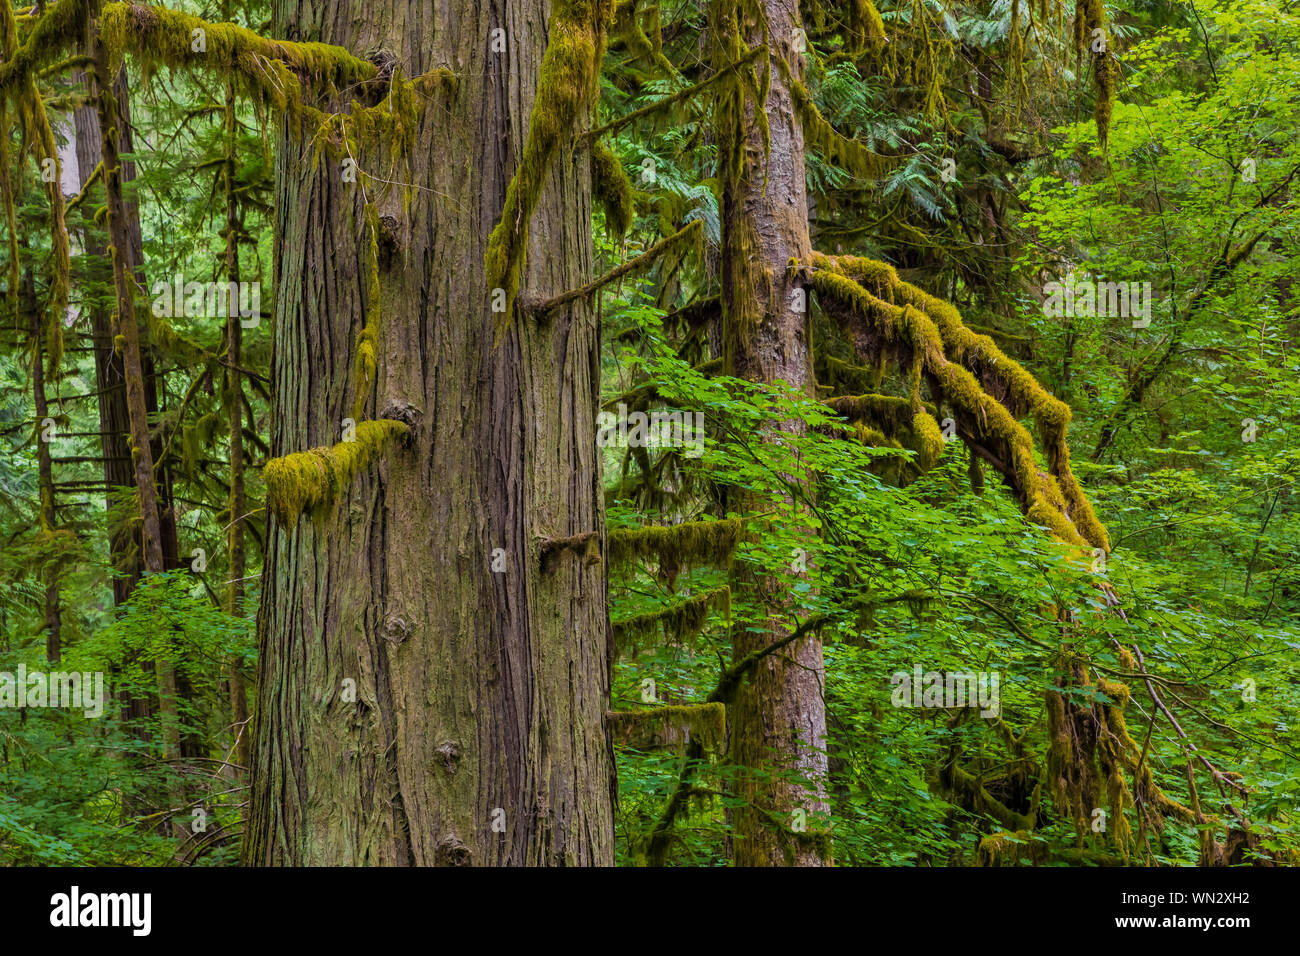 Western Red Cedar, Thuja plicata, and Sitka Sprude, Picea sitchensis, with Vine Maple, Acer circinatum, in Federation Forest State Park near Mount Rai Stock Photo